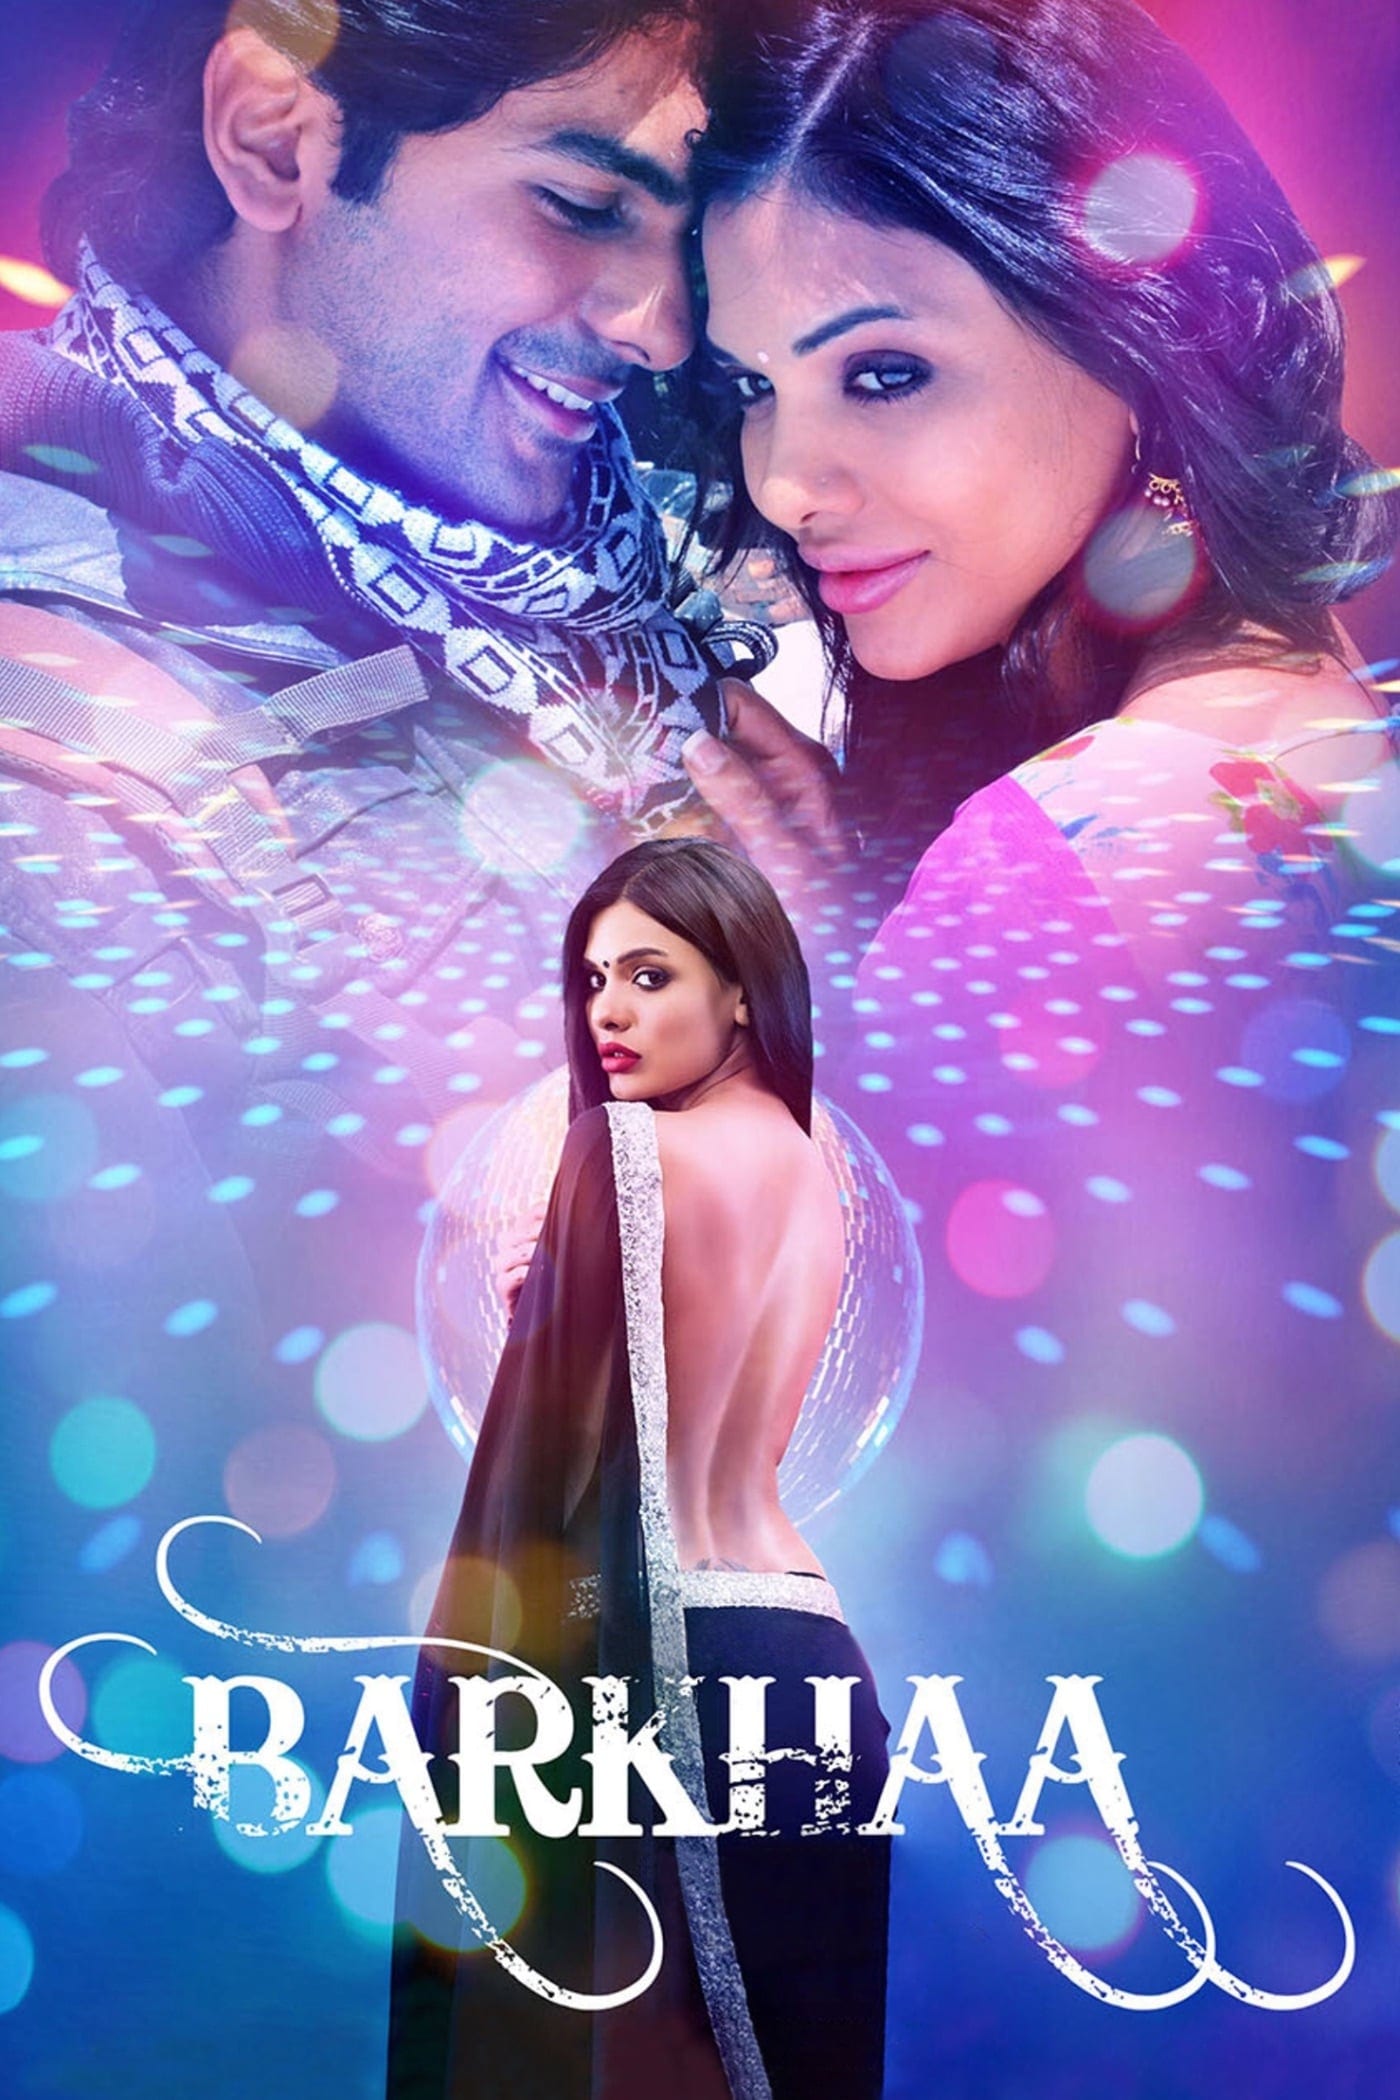 Poster for the movie "Barkhaa"